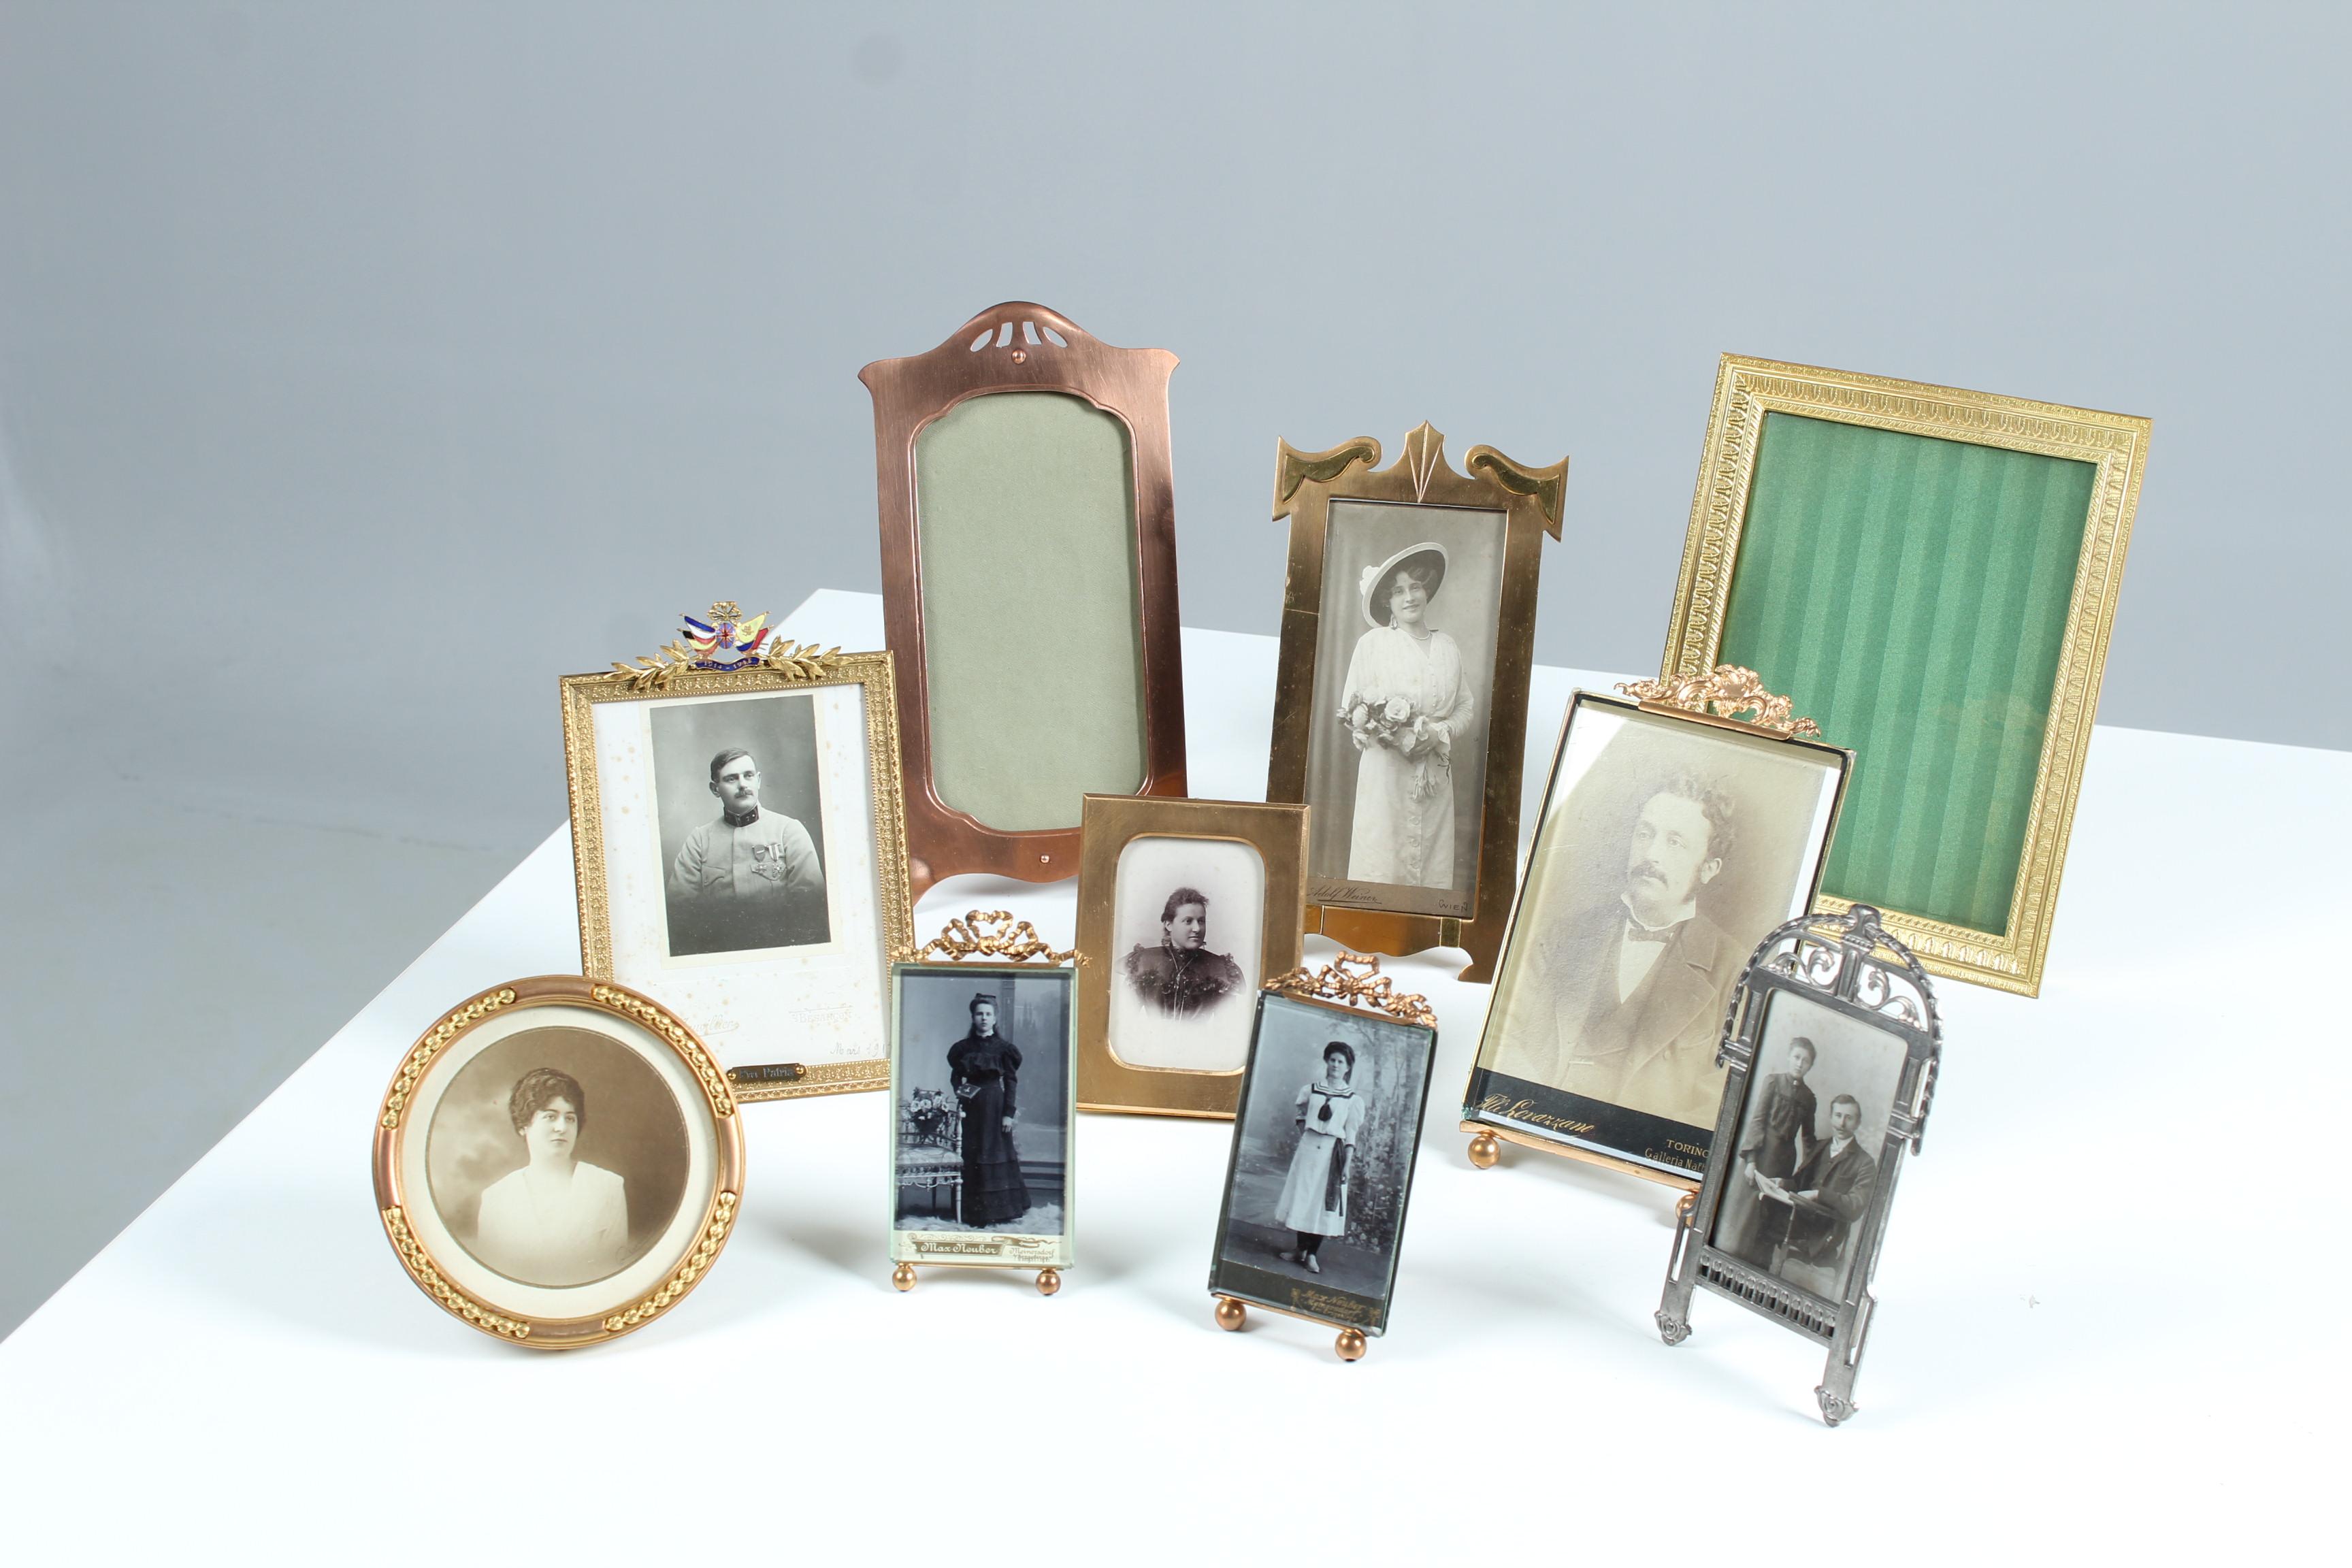 Wonderful set of 10 photo frames from the late 19th and early 20th century. Fantastic frames of Art Nouveau, Art Deco and Neoclassical style. 
All frames and also the glasses are very well preserved, without damage and have been lovingly cleaned and